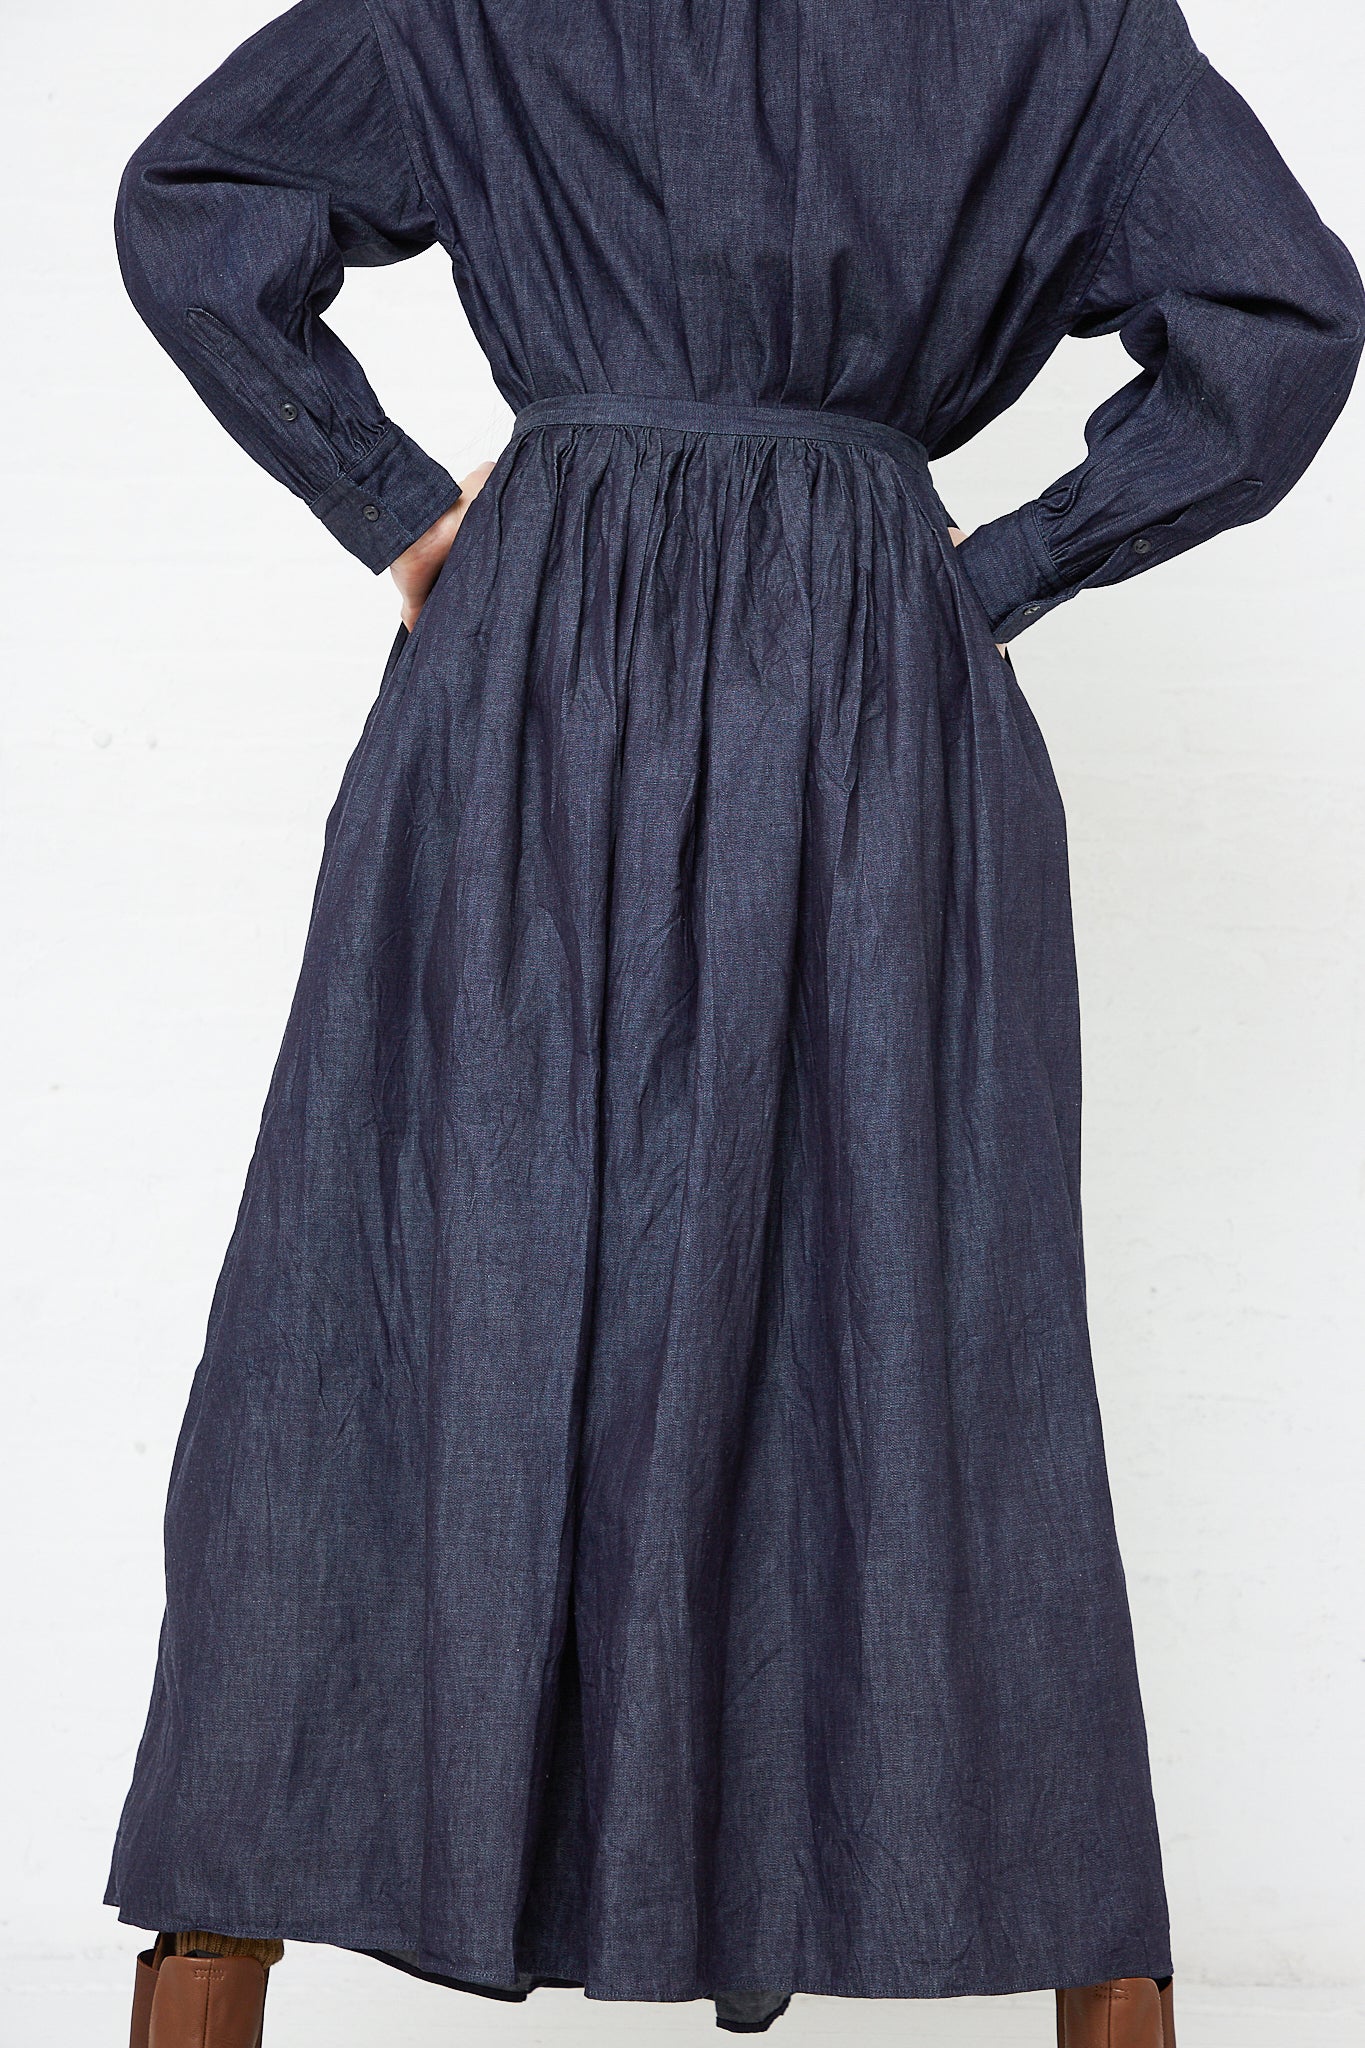 The back view of a woman wearing a Toujours Cotton Denim Cloth Pleated Maxi Skirt in Indigo dress.